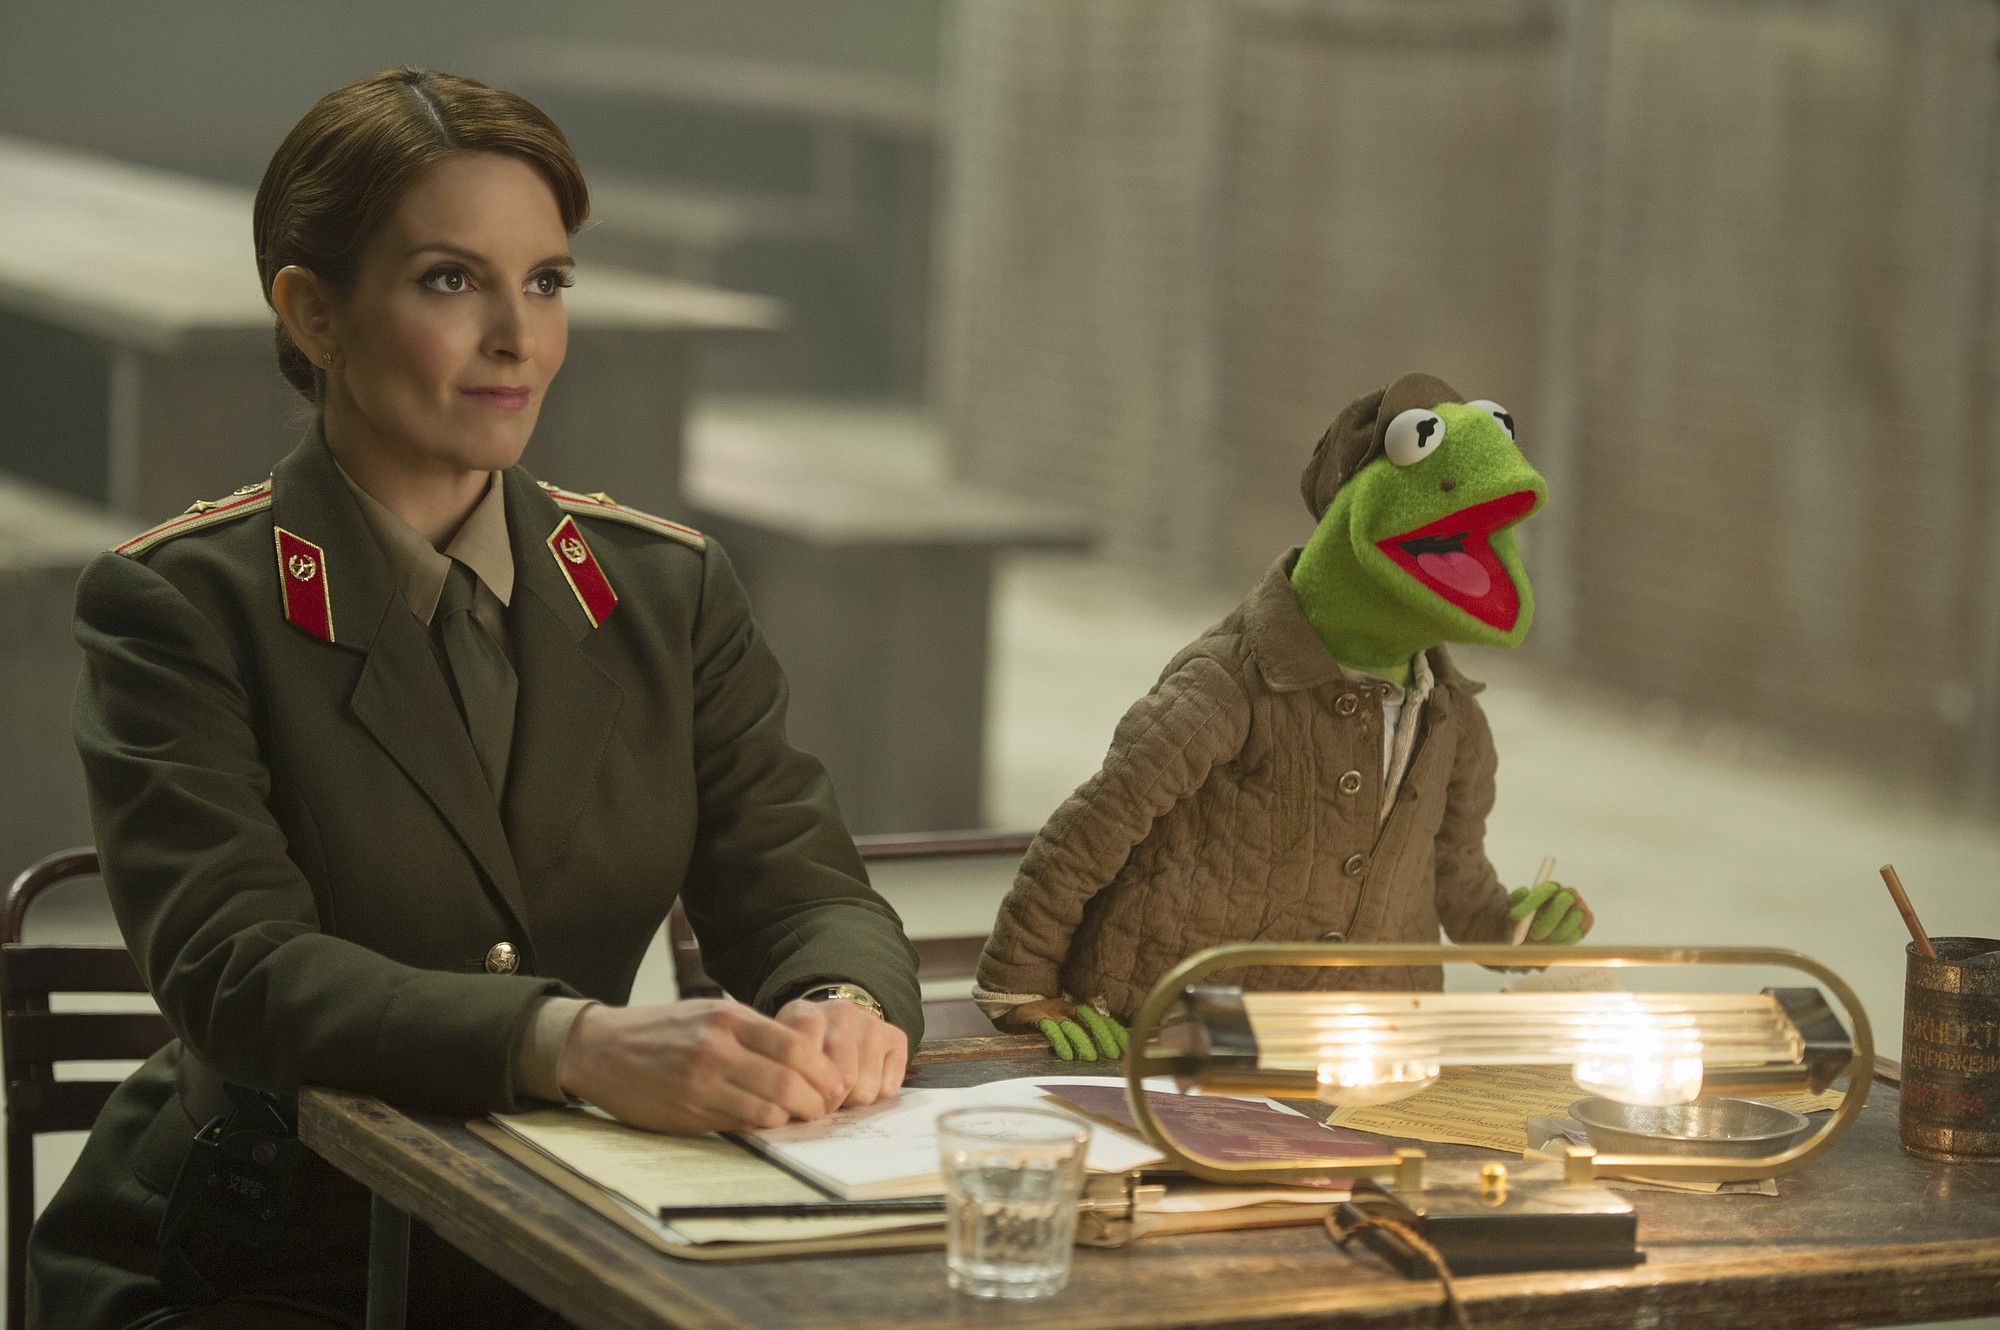 &quot;Muppets Most Wanted&quot; will be shown at John Ball Park as part of Vancouver's Friday Night Movies in the Park.